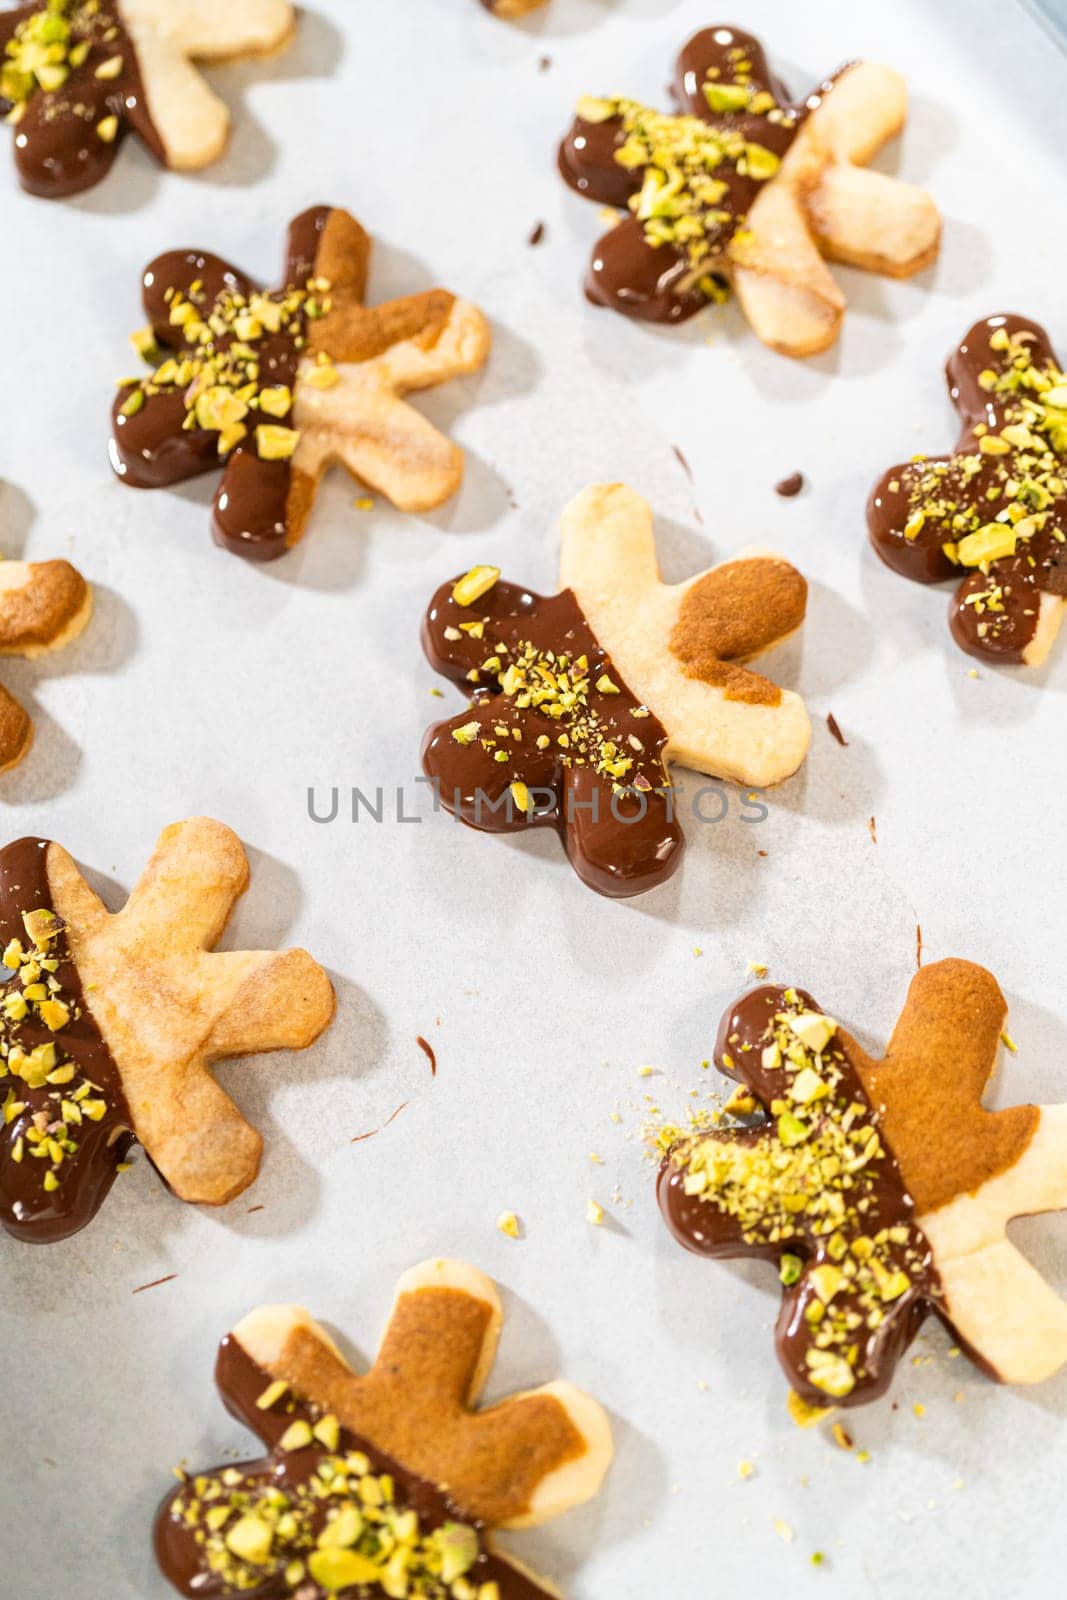 Making Holiday Star Cookies, Chocolate-Dipped with Pistachio Topping by arinahabich